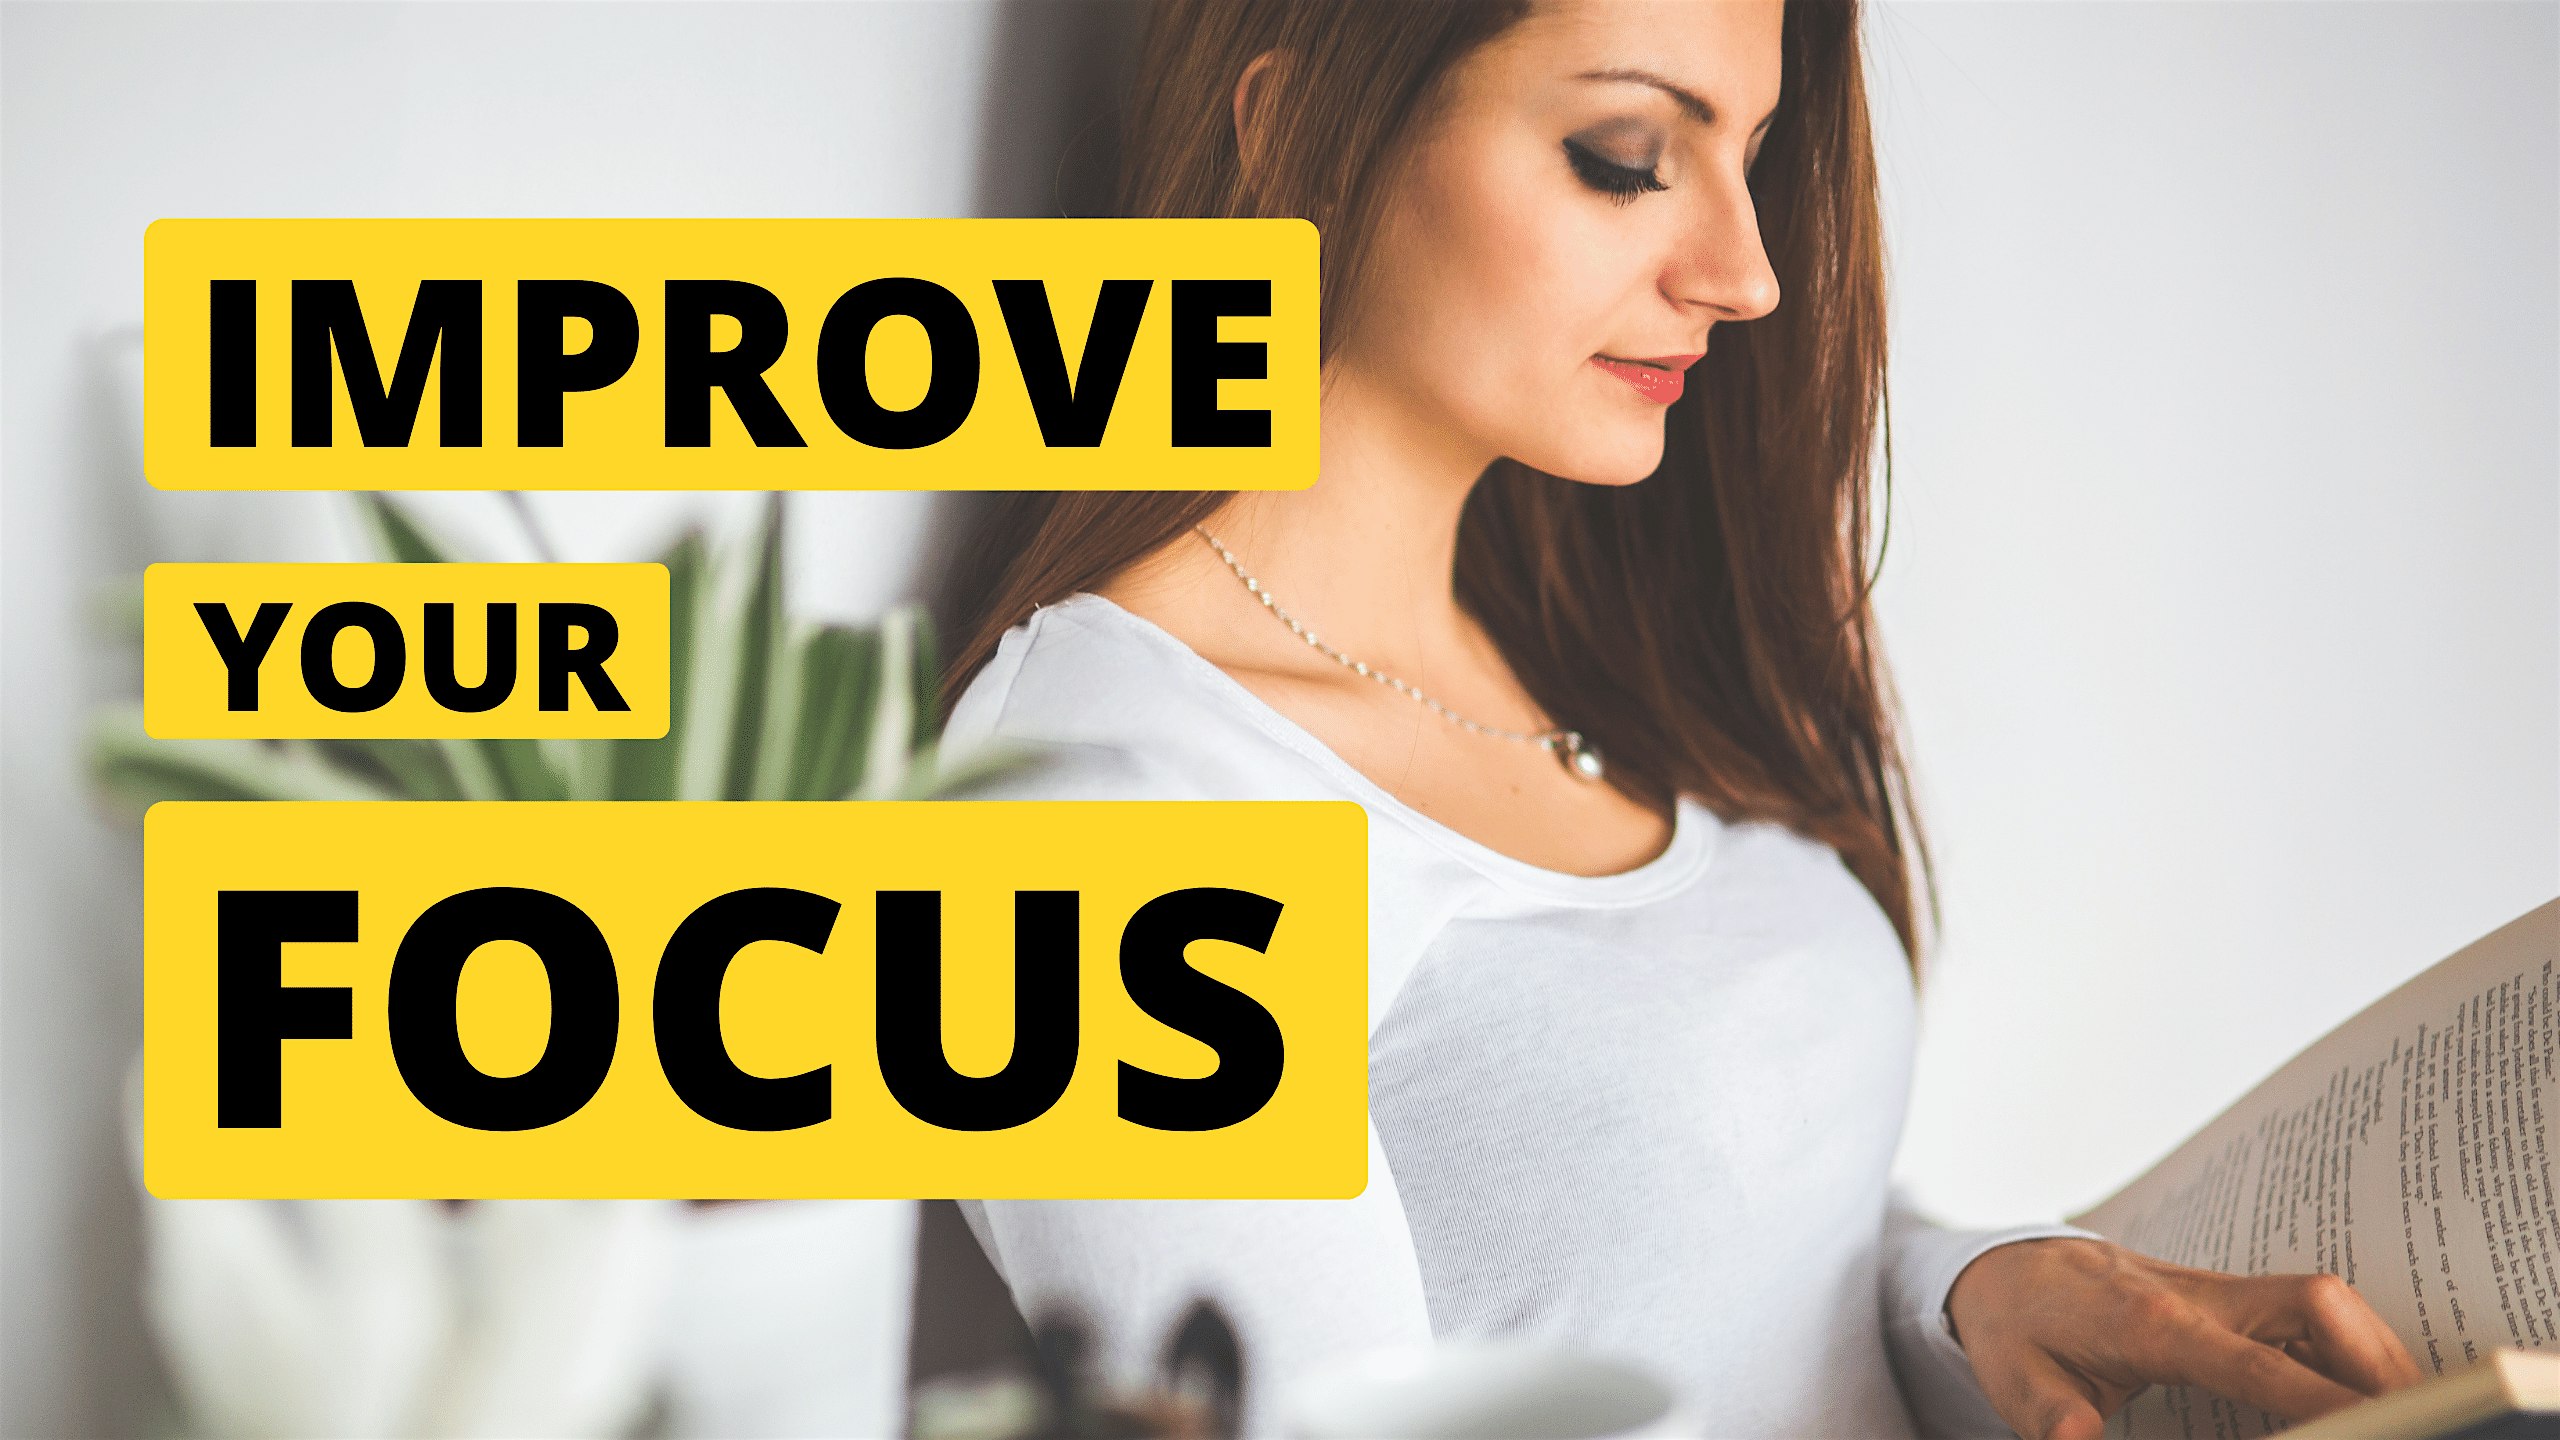 How To Improve Your Focus and Productivity - Dhaka, 16 August | Event in Dhaka | AllEvents.in